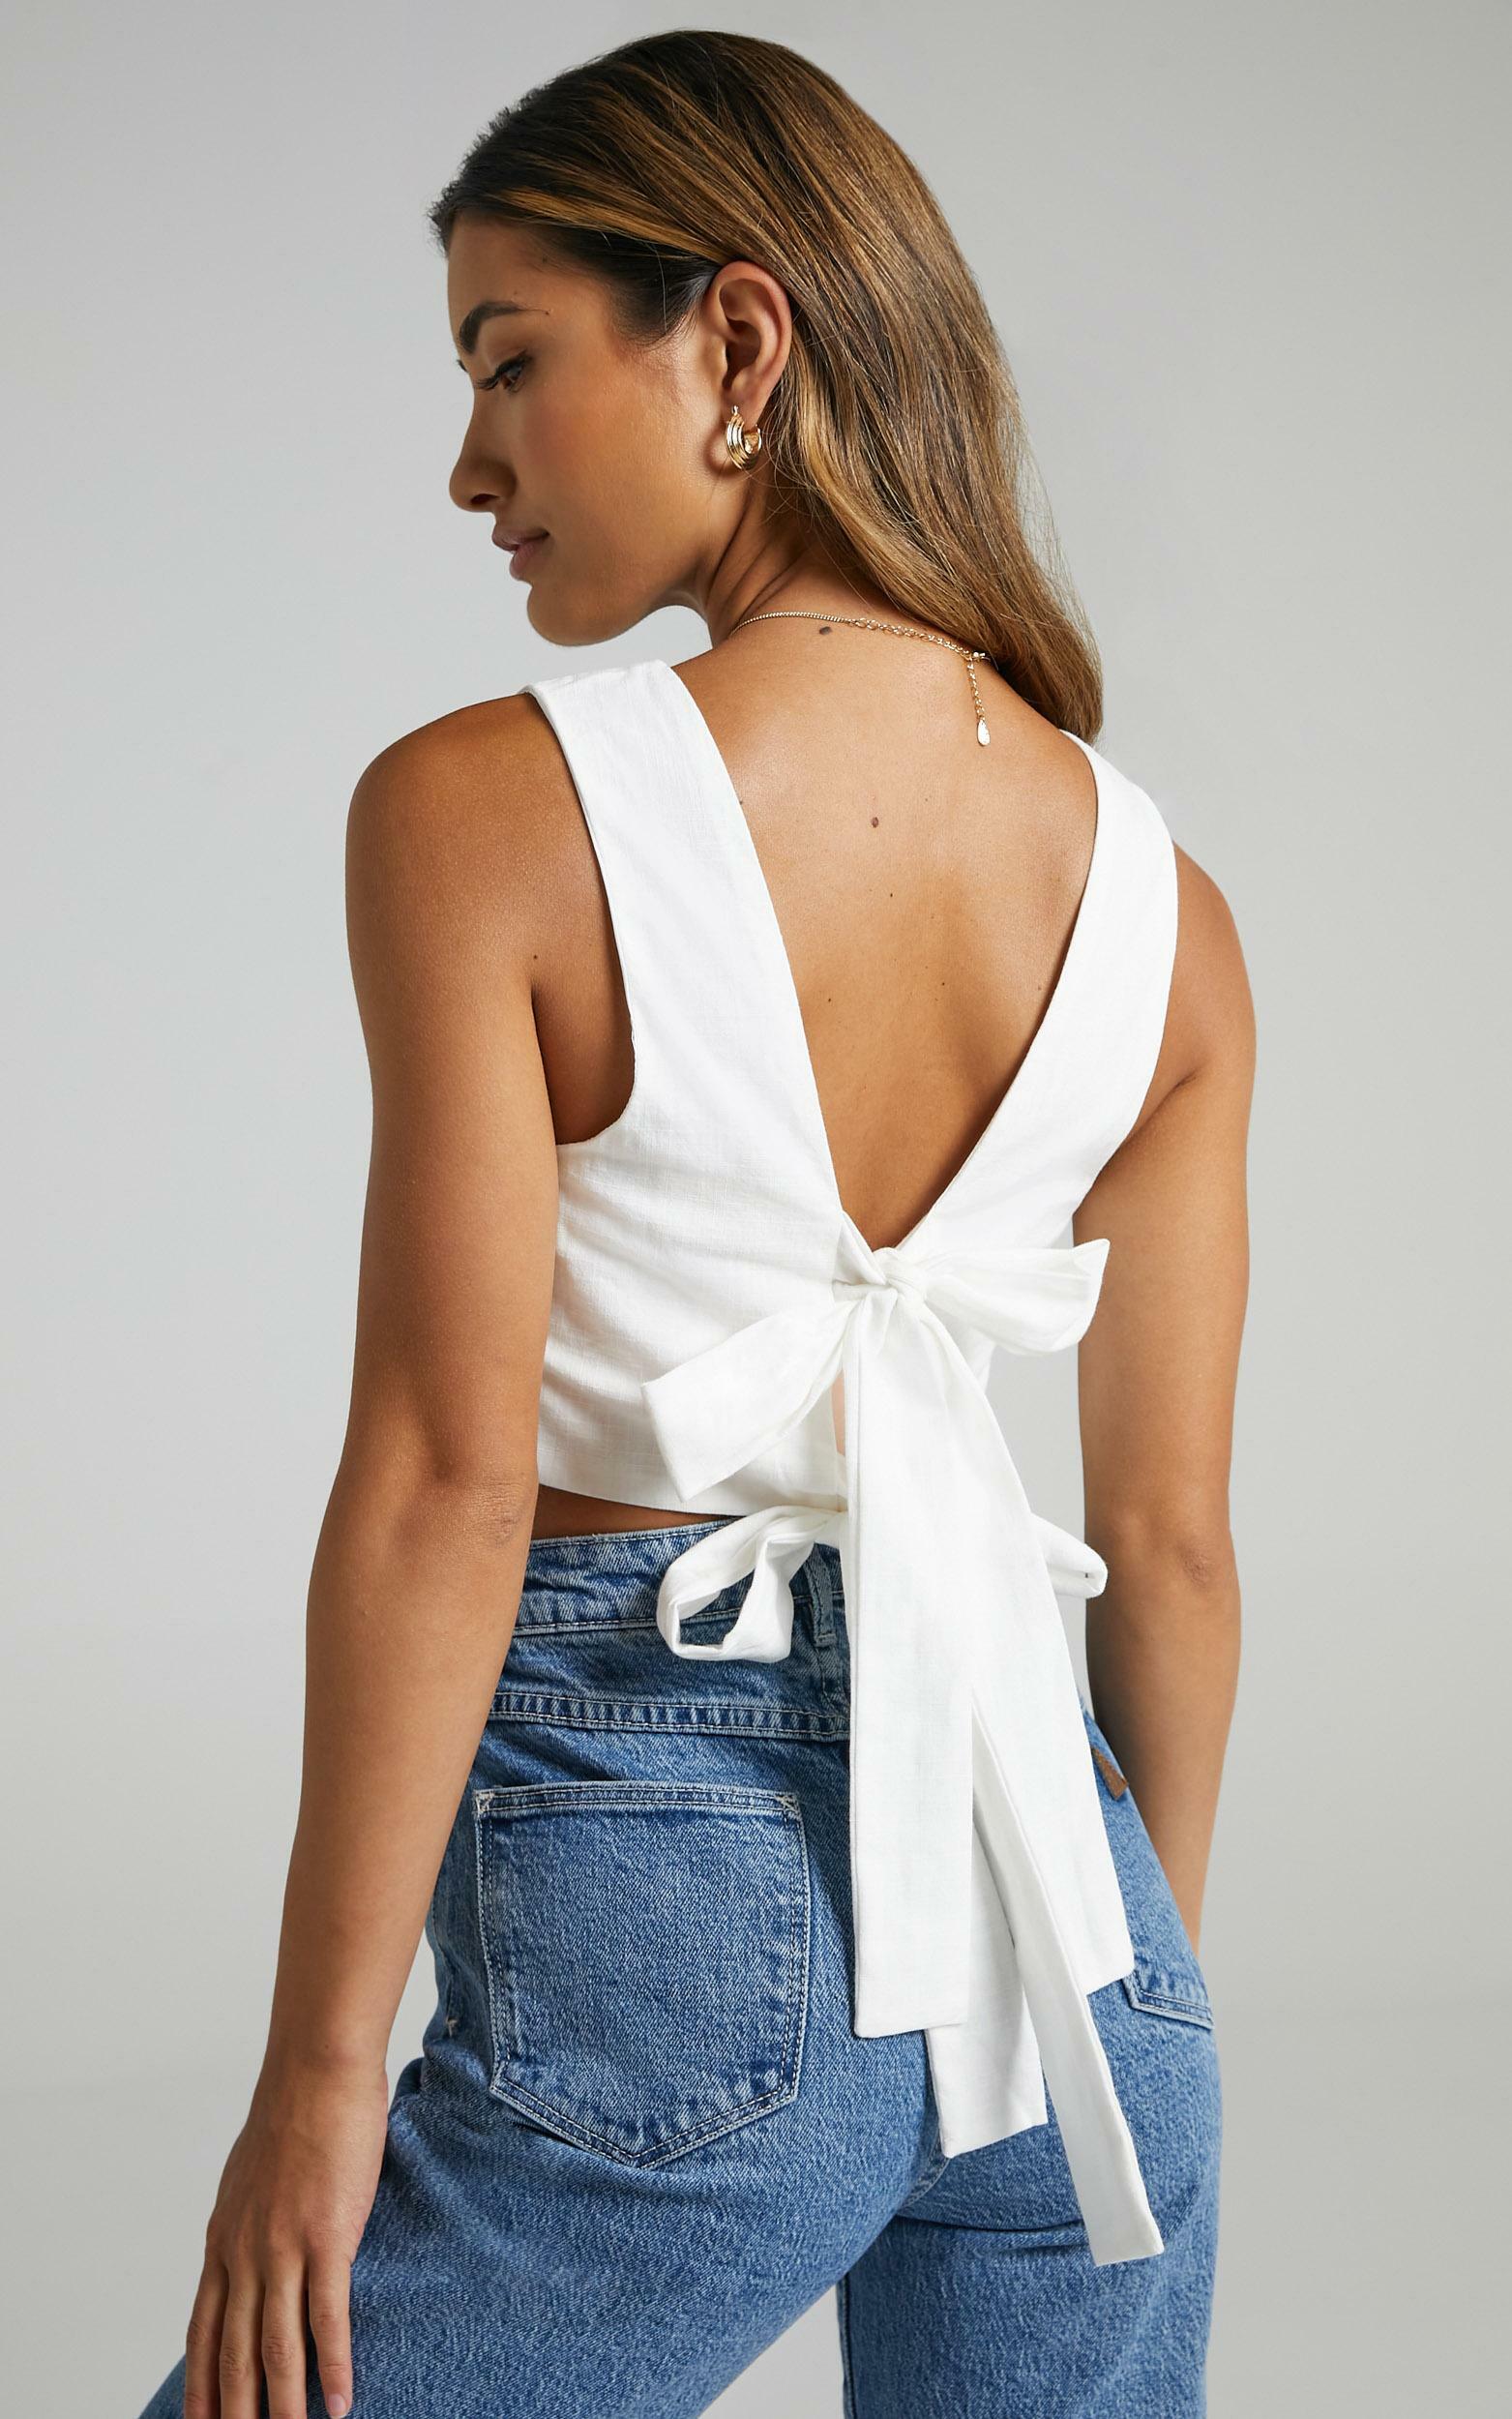 Loxley Top in White - 06, WHT1, hi-res image number null